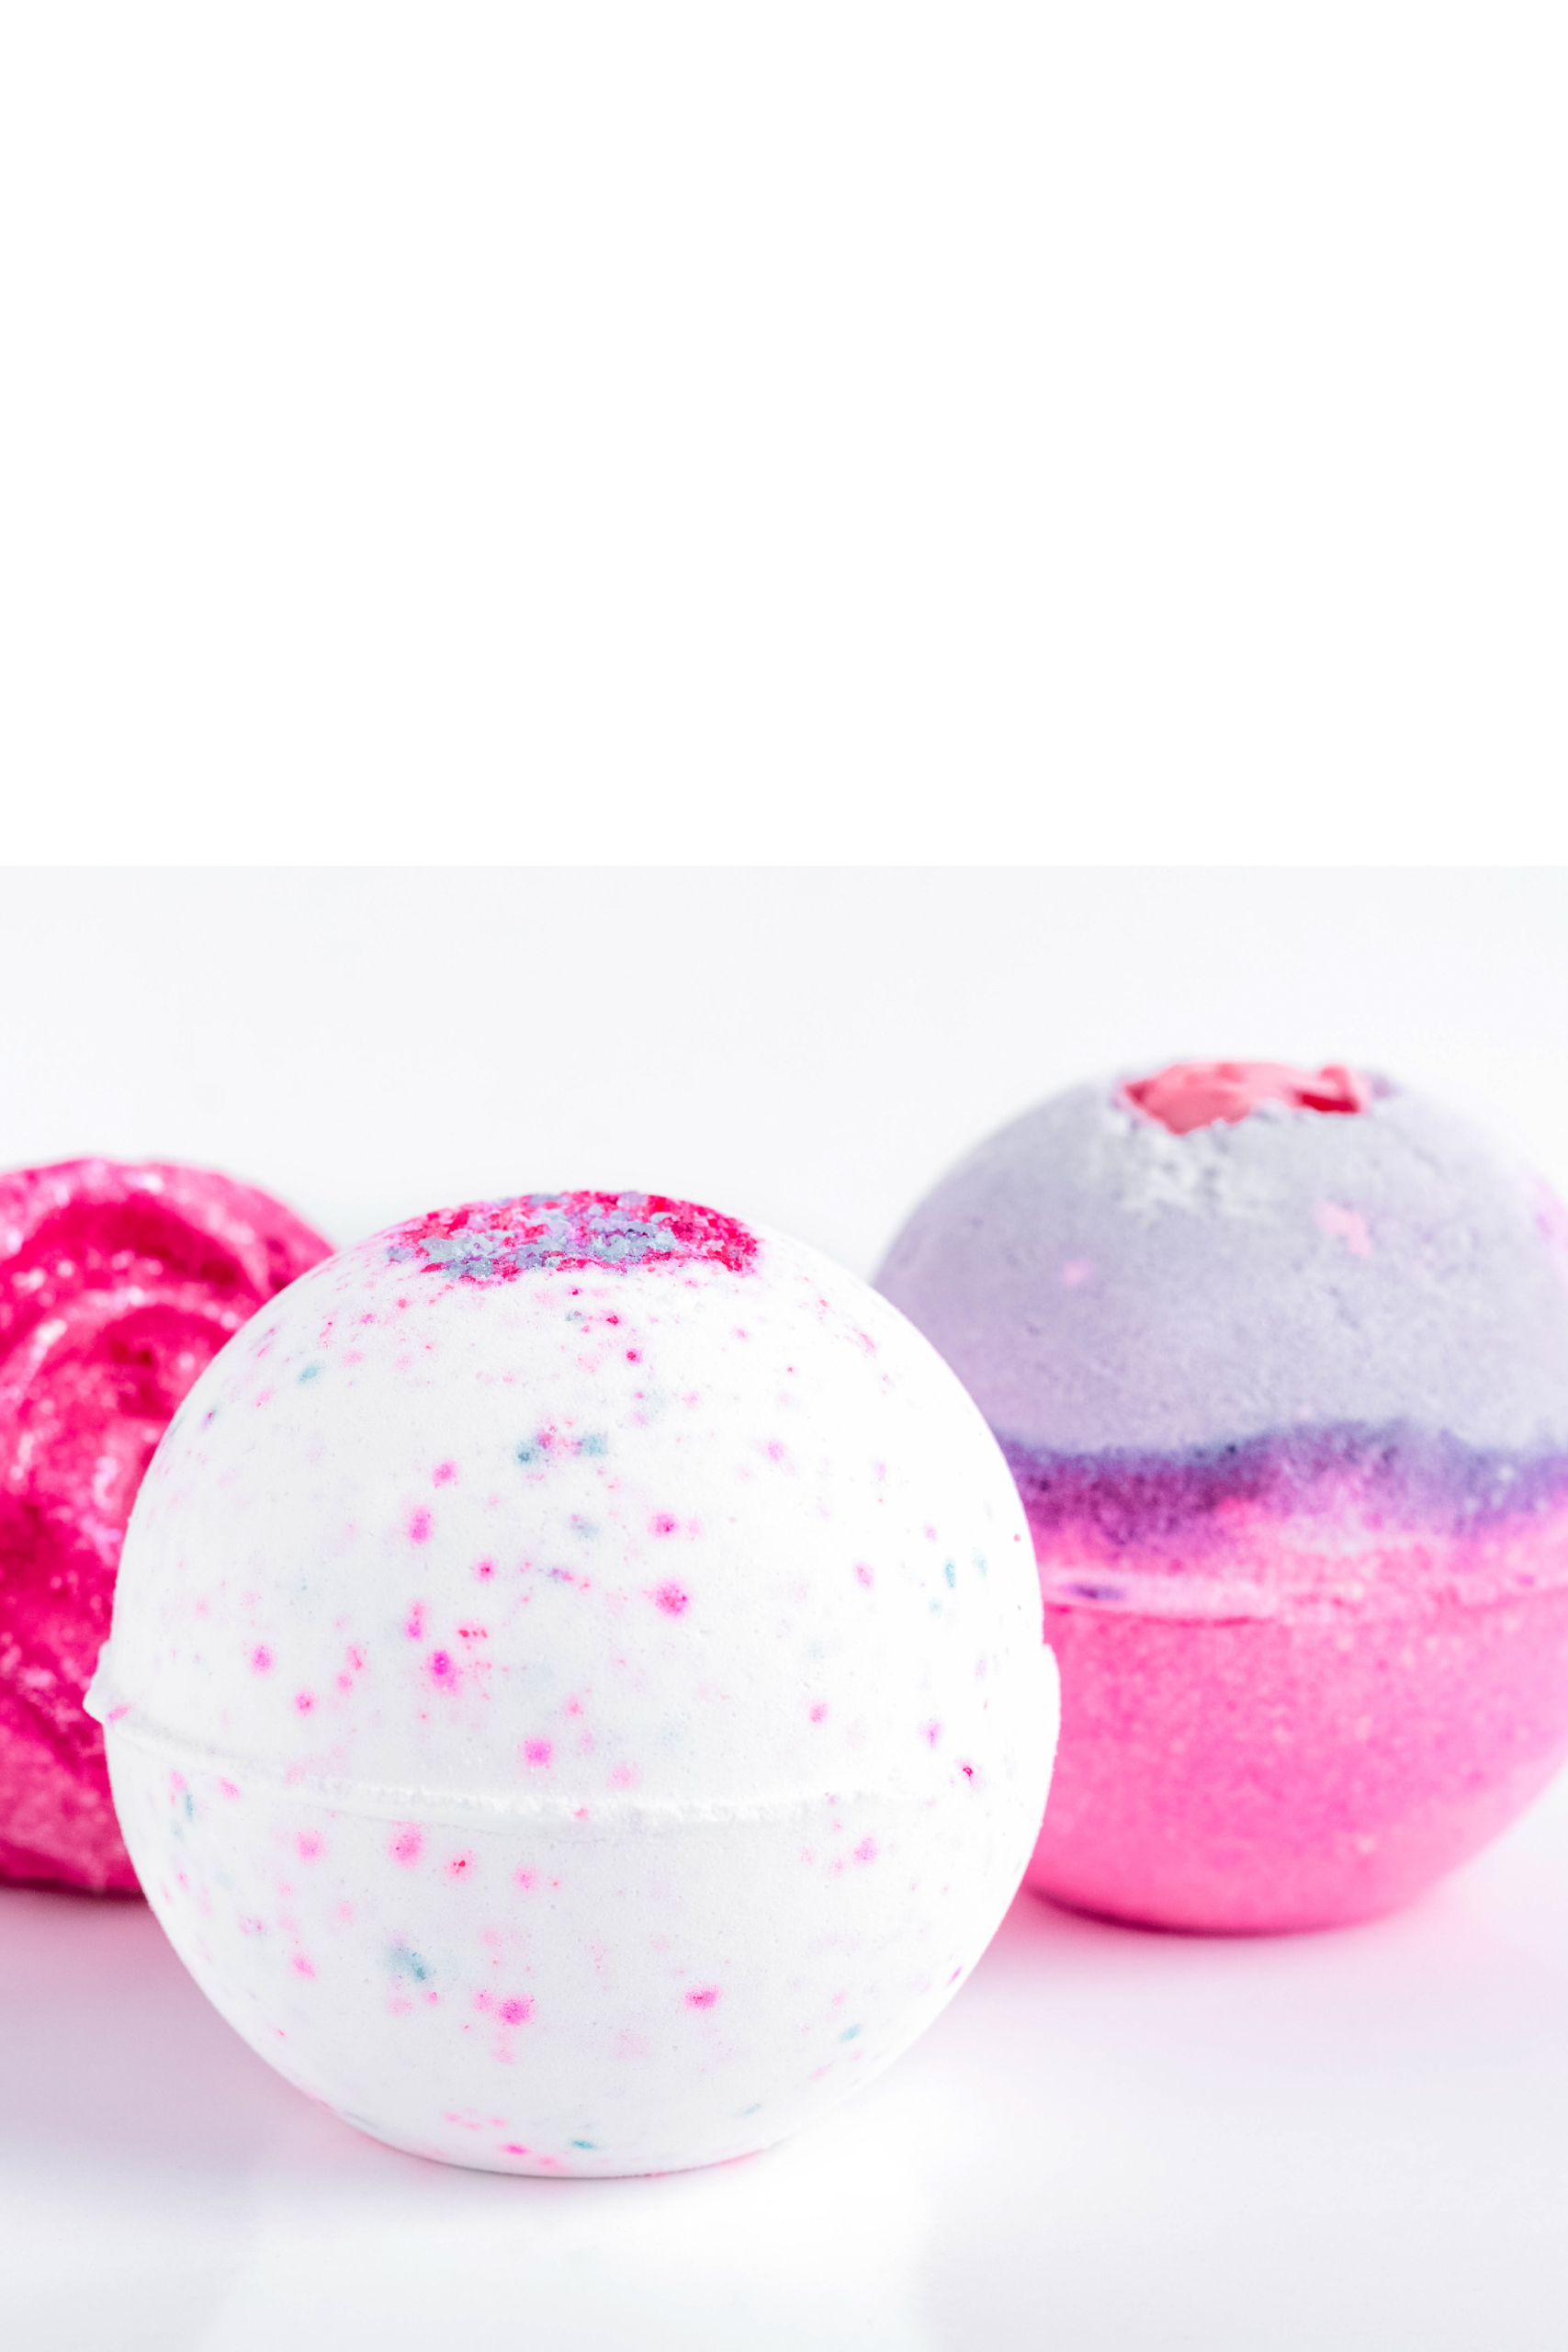 Tales of the Flowers: Making our own Bath Bombs